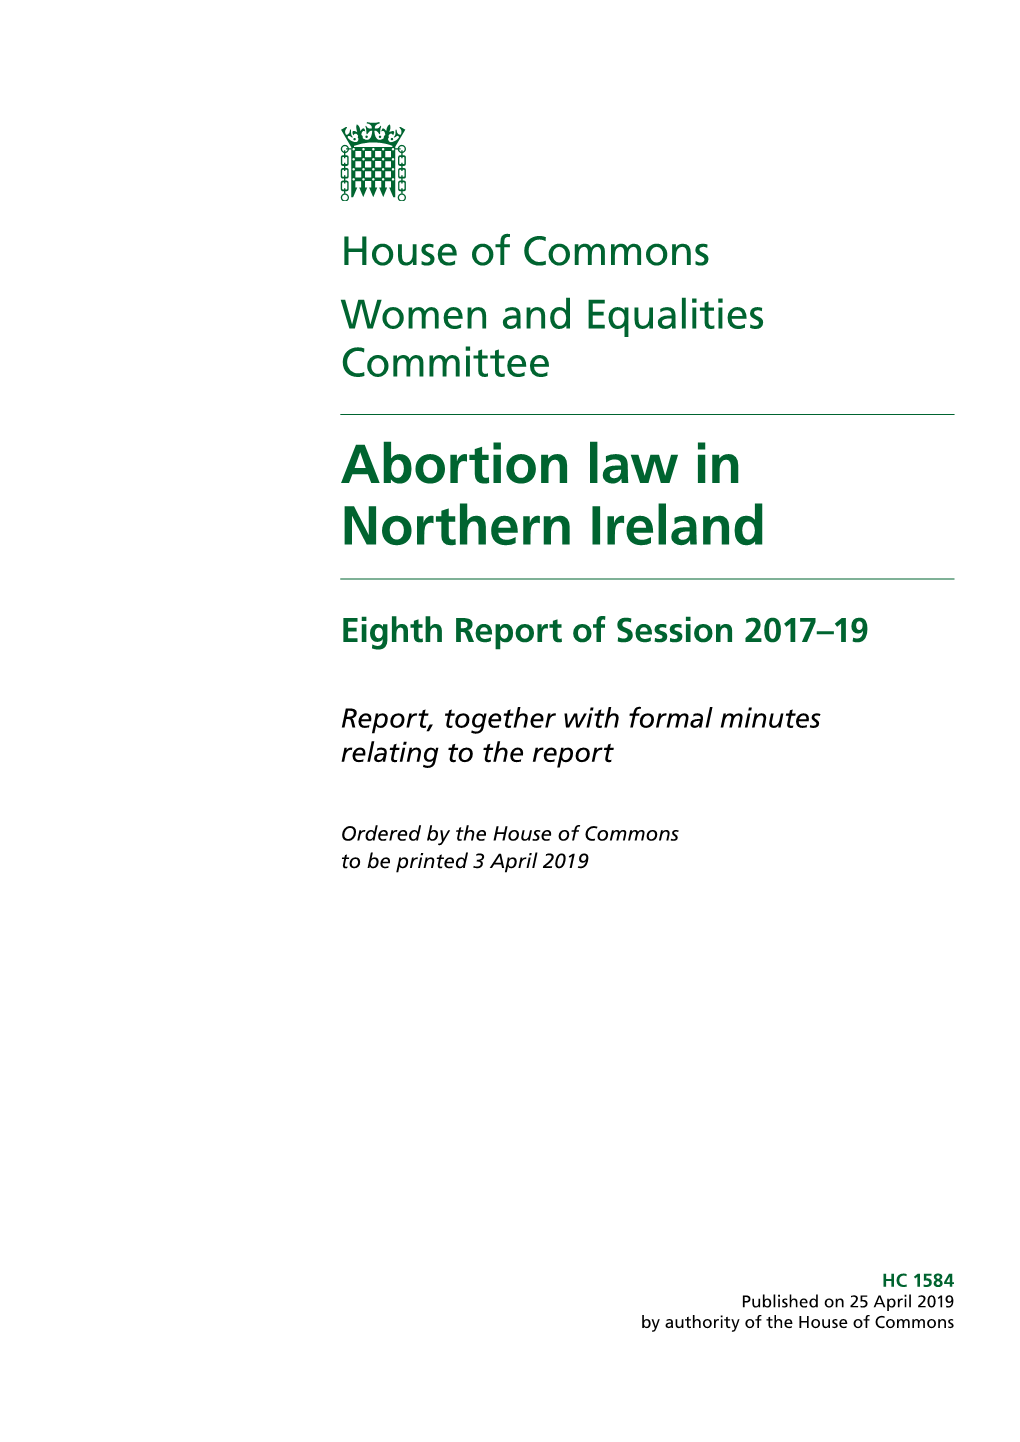 Abortion Law in Northern Ireland